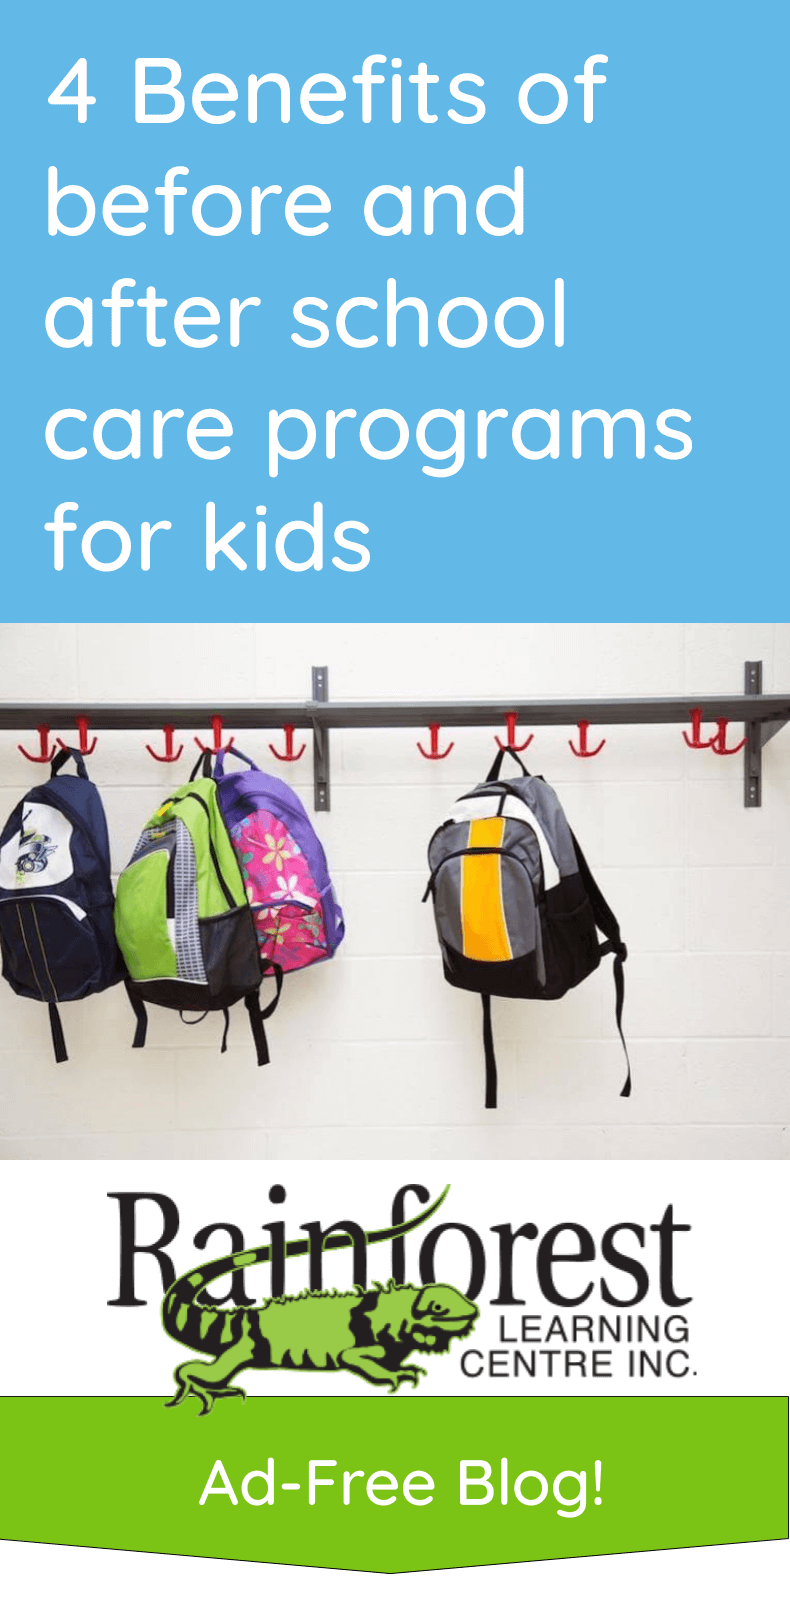 4 Benefits of before and after school care programs for kids - article pinterest image